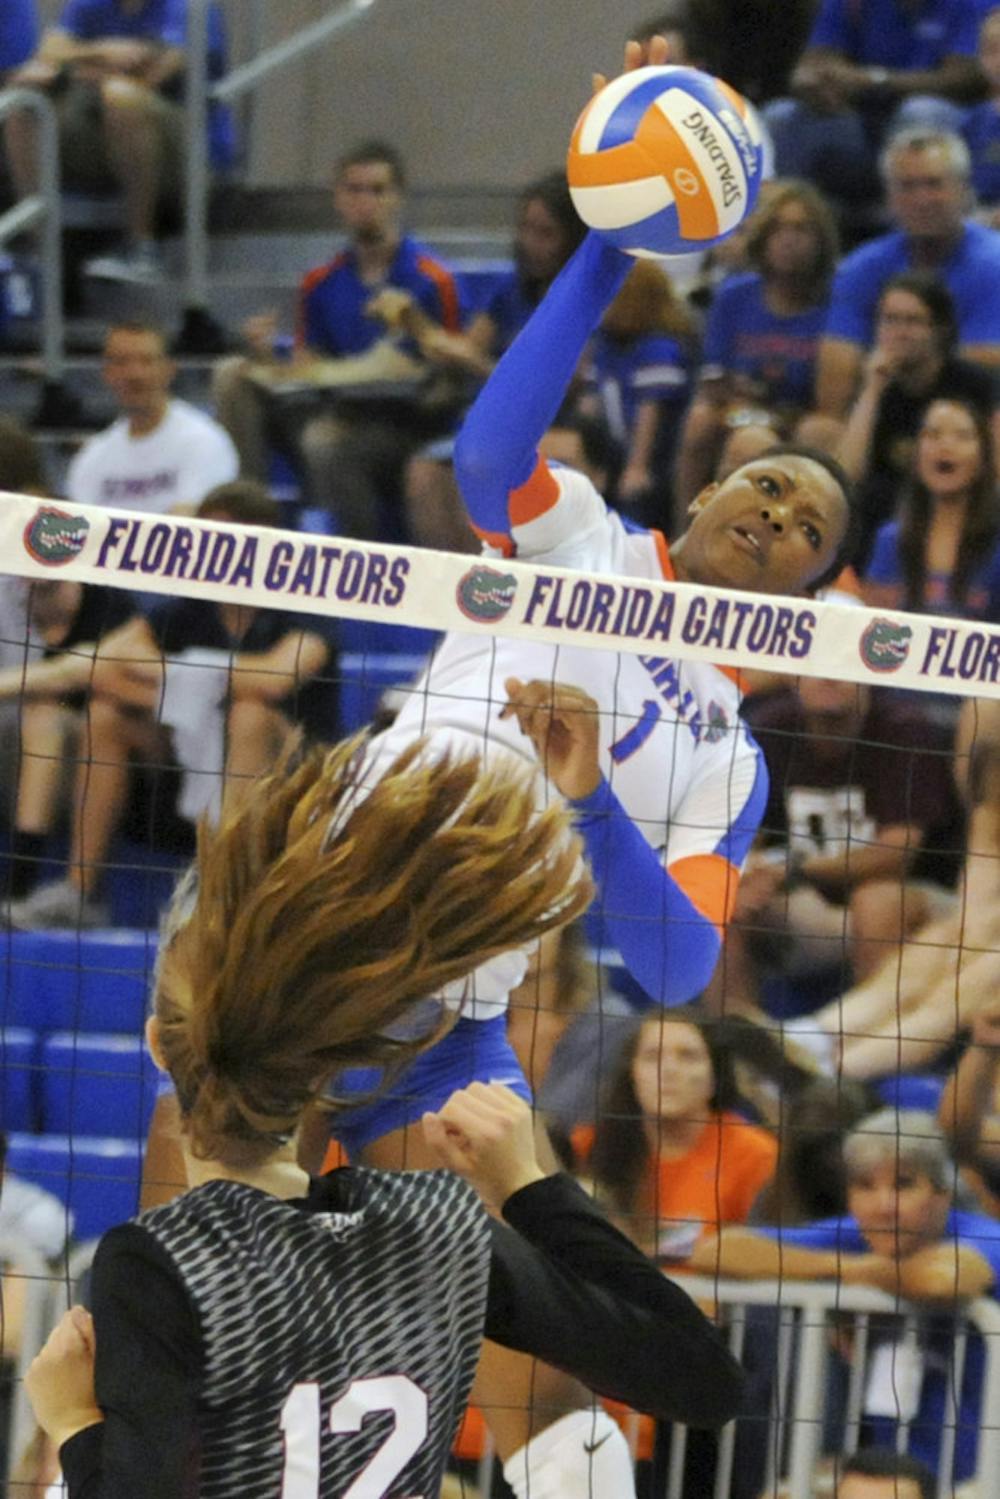 <p>UF middle blocker Rhamat Alhassan swings for a kill attempt during Florida's 3-0 win against Texas A&amp;M on Oct. 3, 2015, in the O'Connell Center.</p>